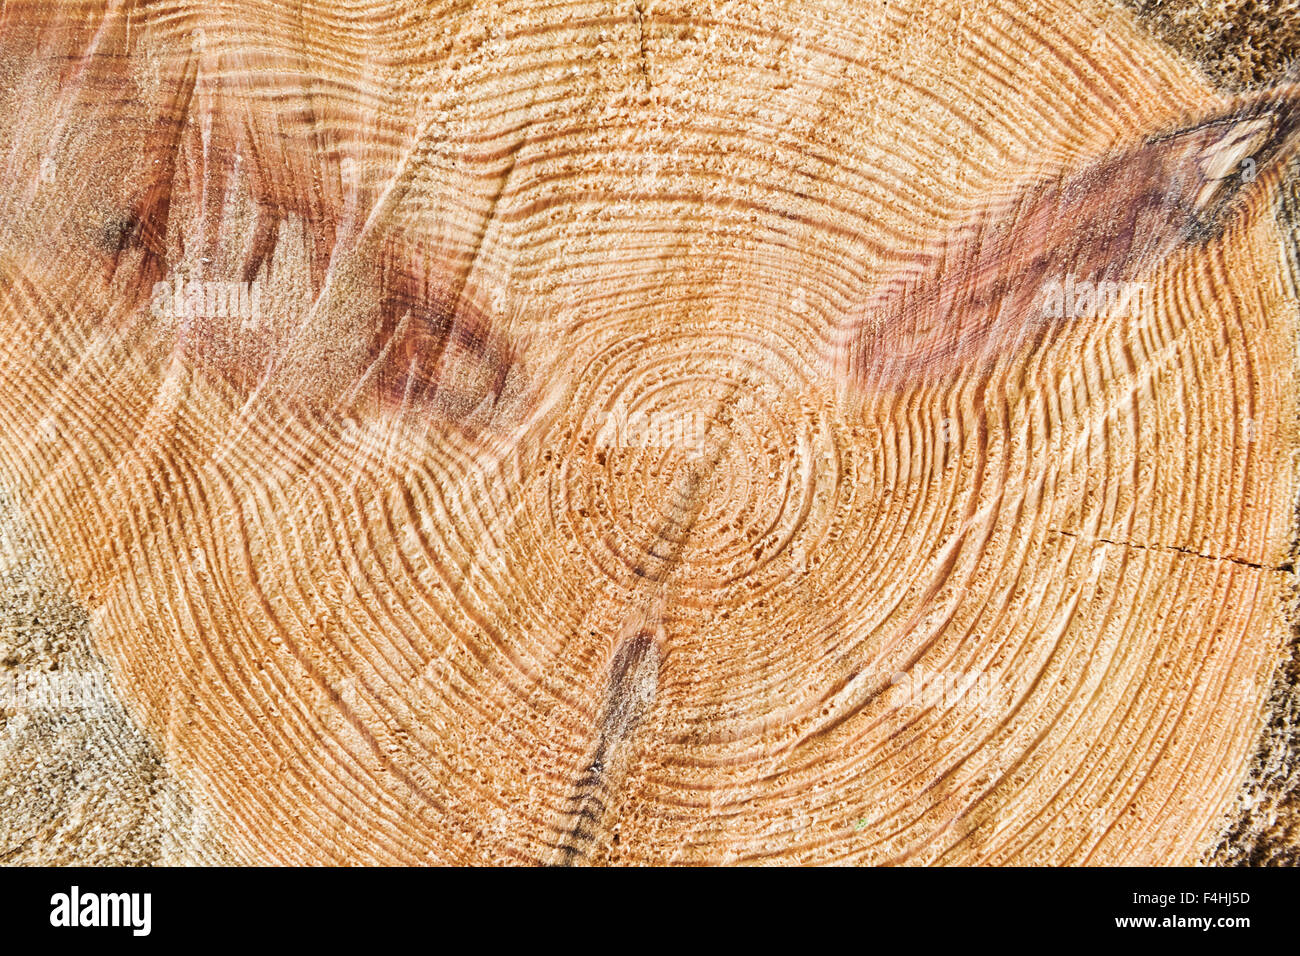 Fresh wooden log section close-up photo, background texture Stock Photo